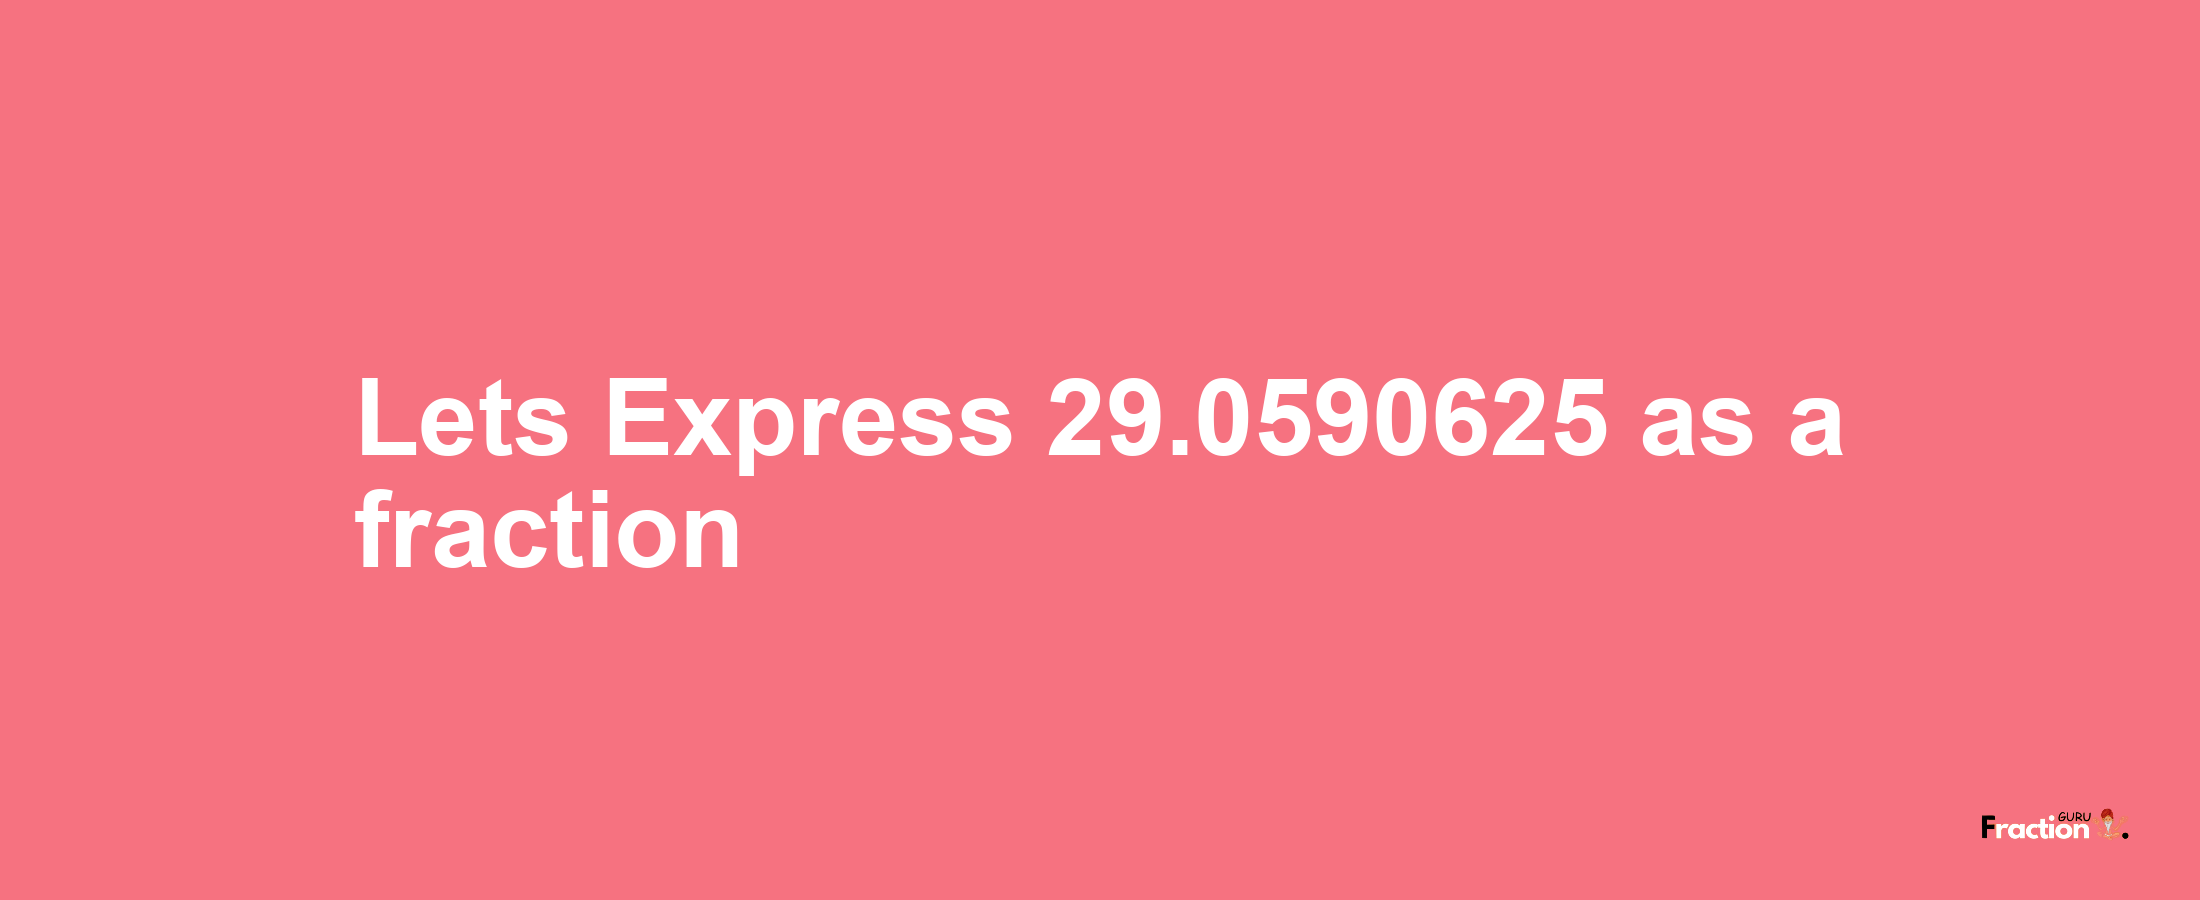 Lets Express 29.0590625 as afraction